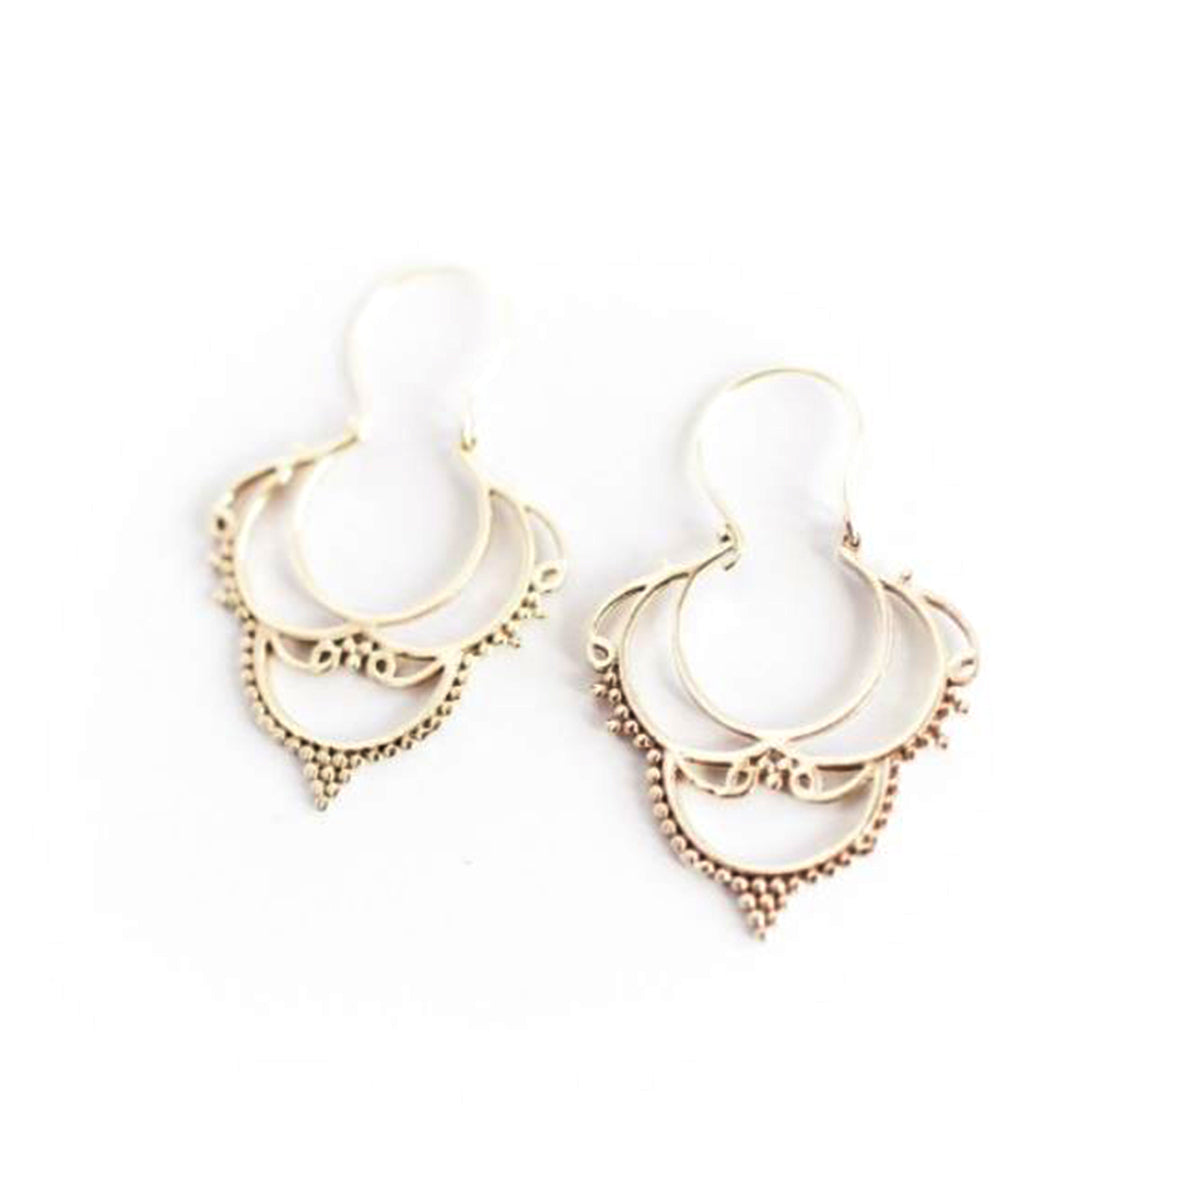 Gold-Plated Chateau Earrings